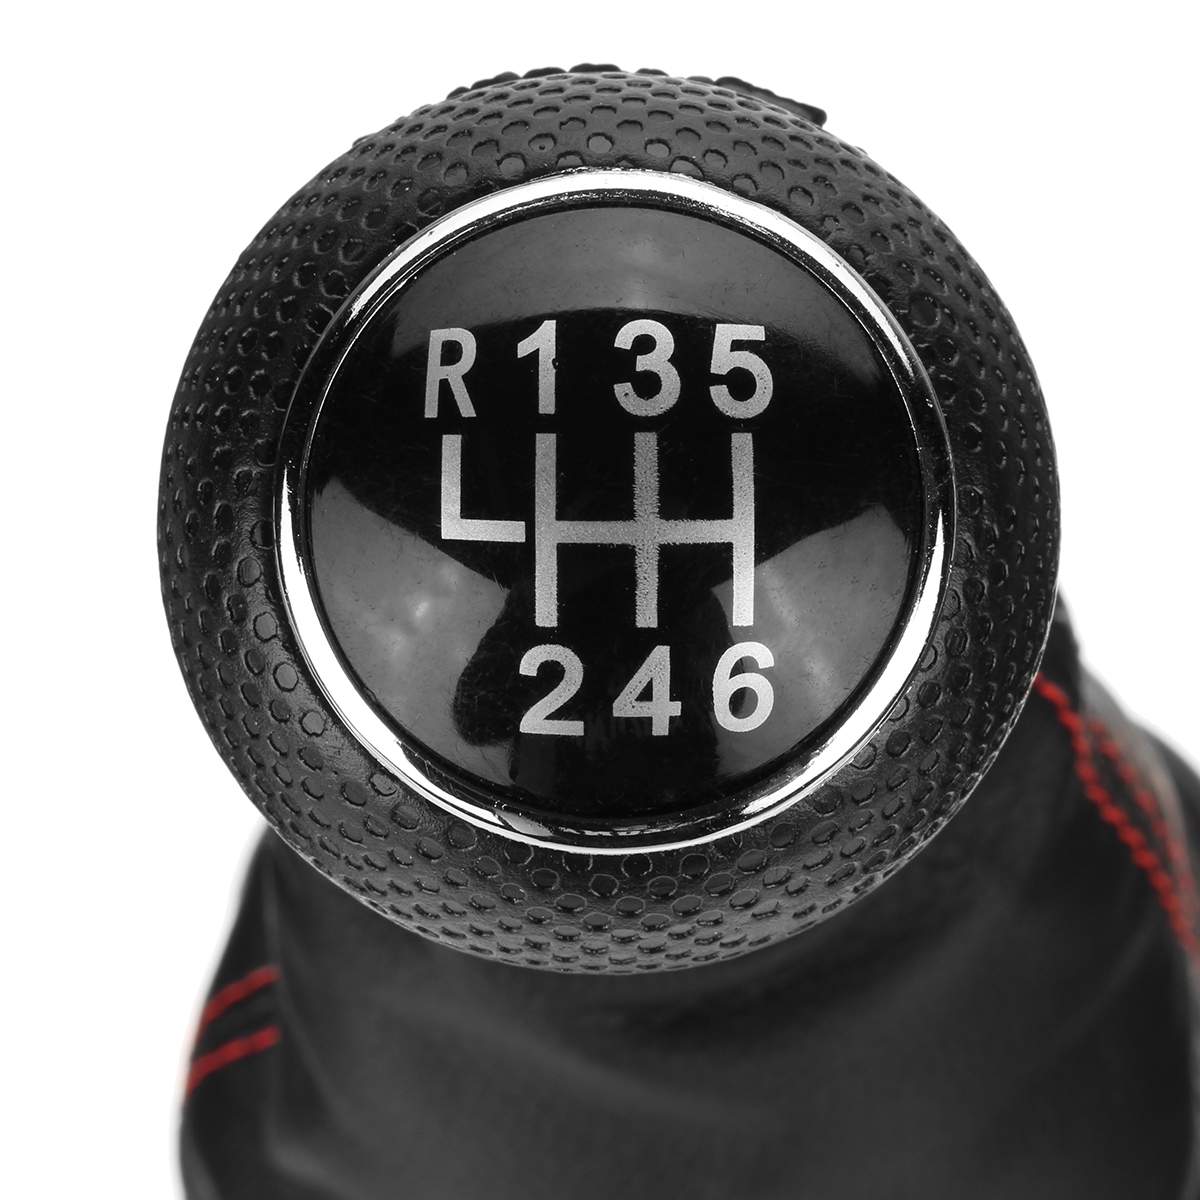 5/6 Speed Gear Shift Knob with Gaitor Boot Dust Cover PU Leather for VW Golf 4 Bora - Auto GoShop